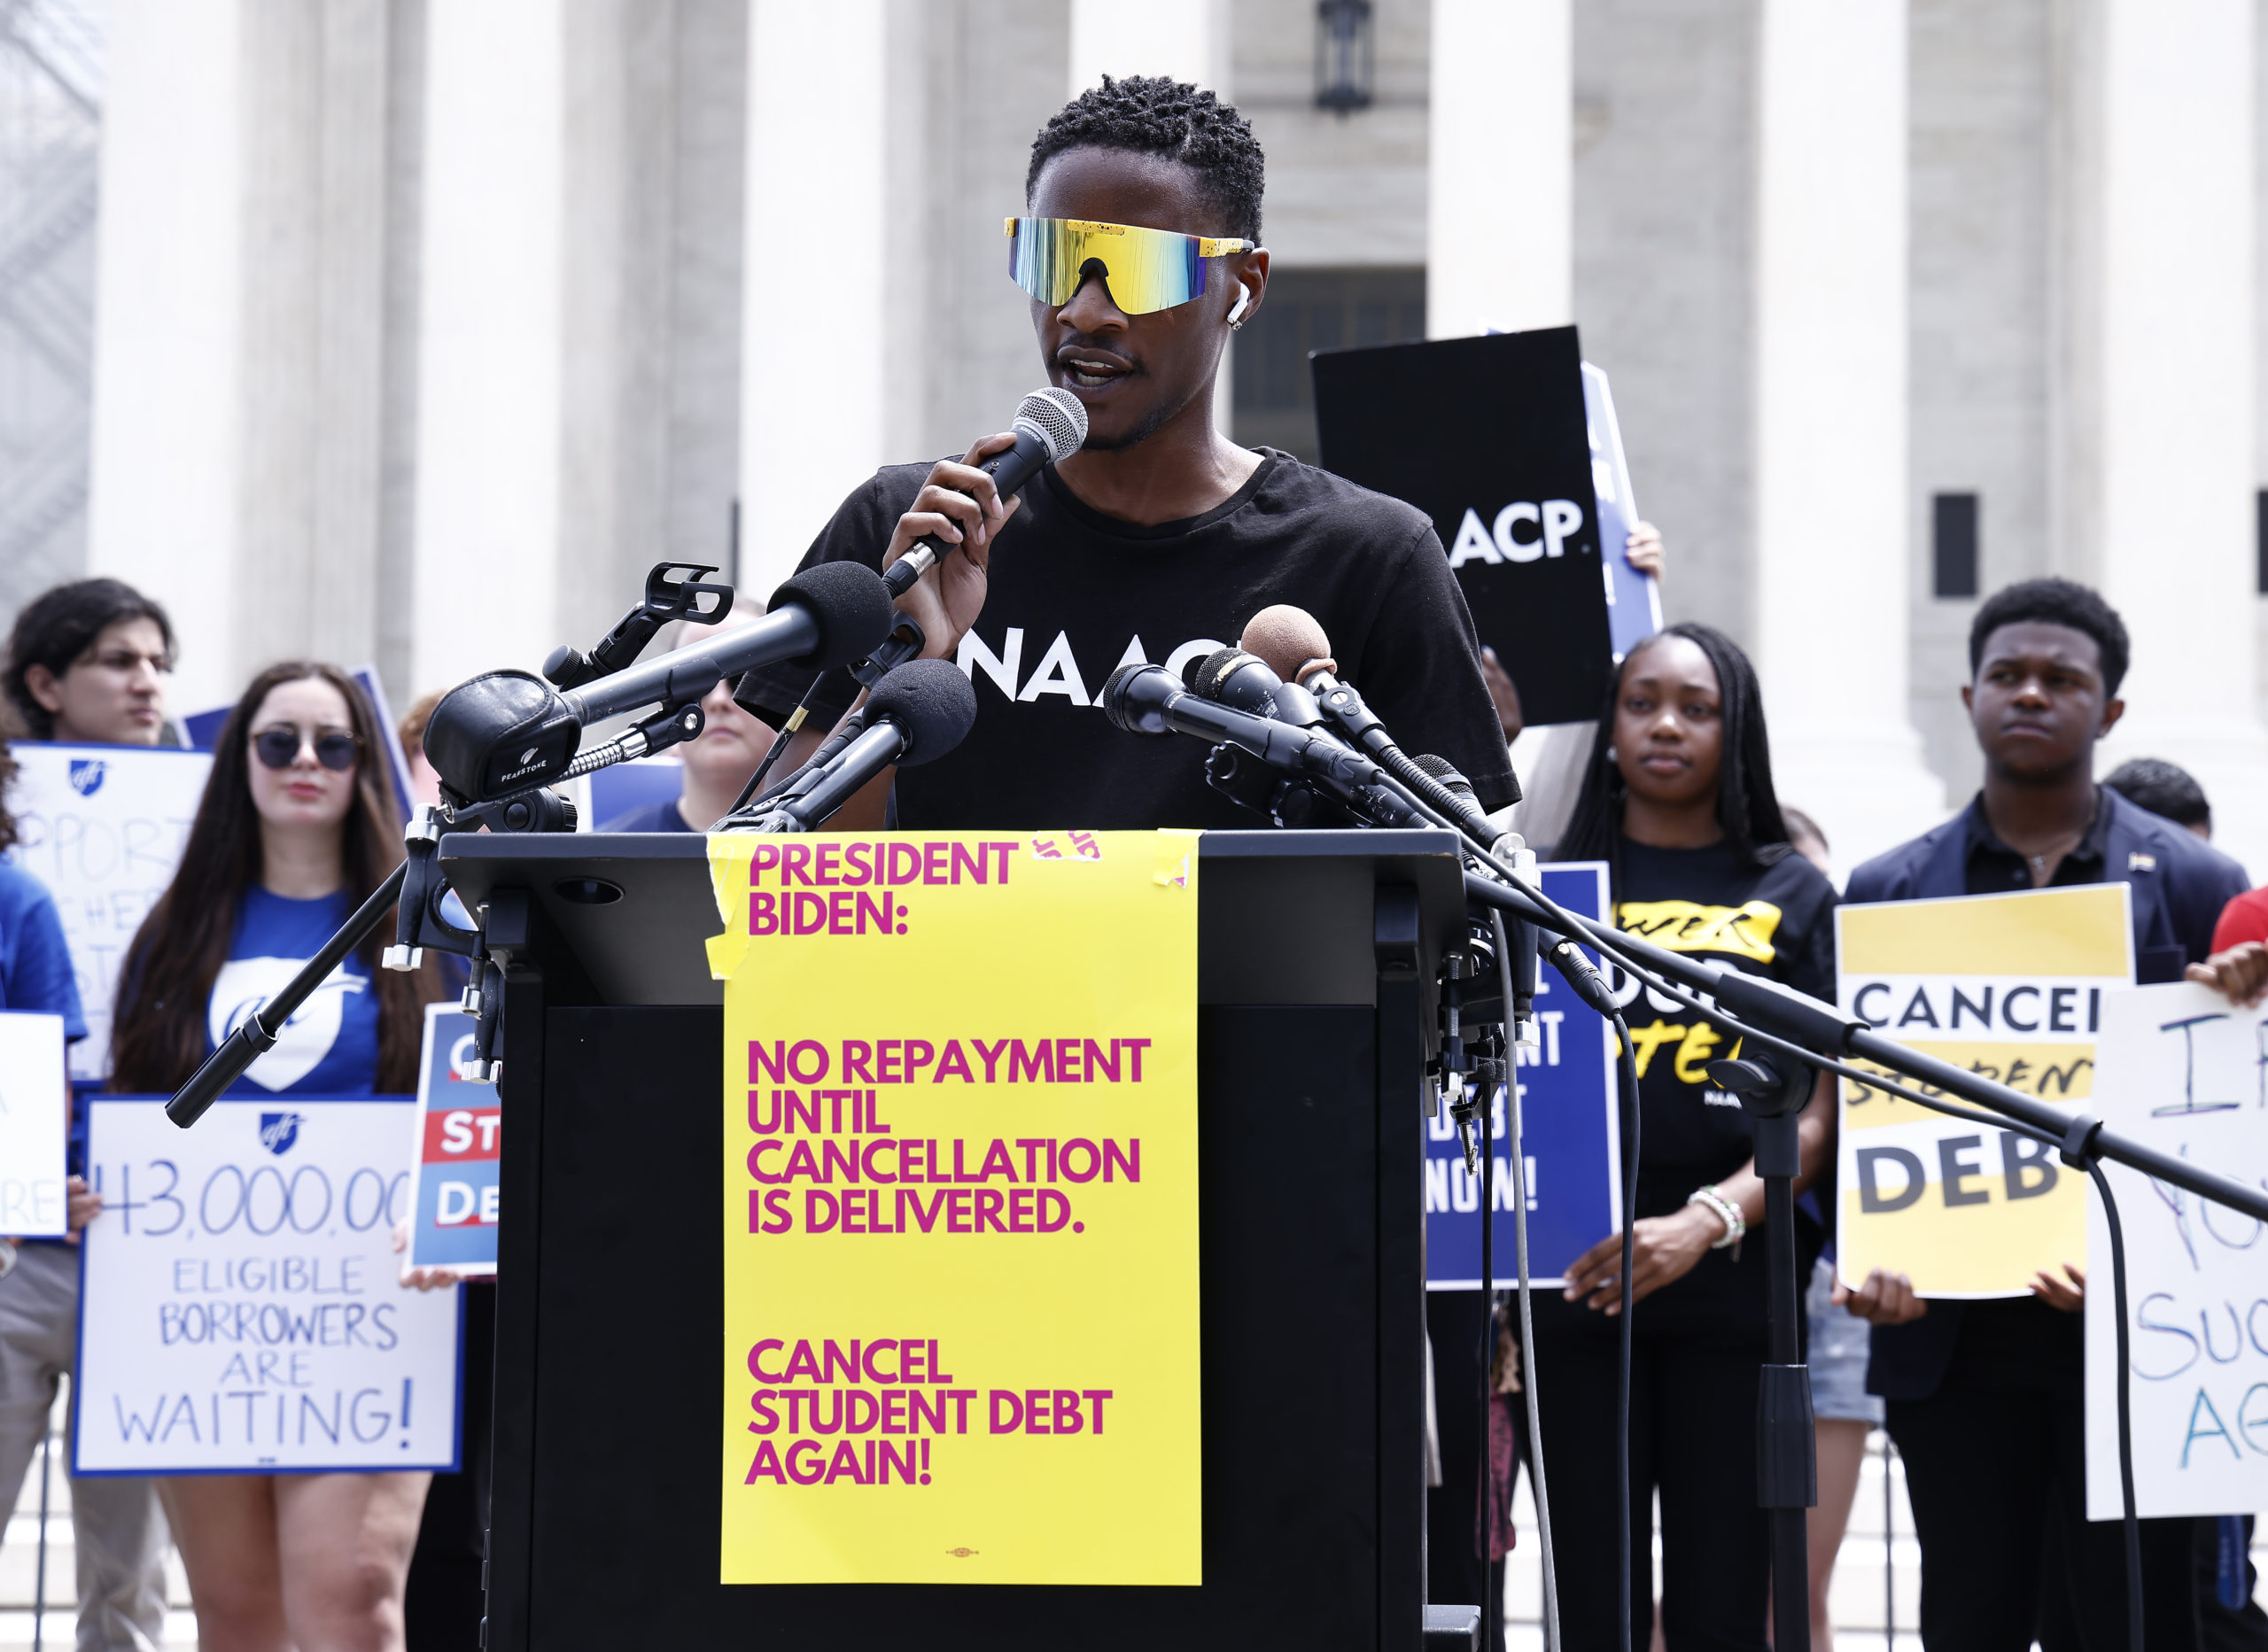  Derrick Lewis, NAACP Y&C, joins student loan borrowers to demand President Biden use "Plan B" to cancel student debt Immediately at a rally outside of the Supreme Court of the United States on June 30, 2023 in Washington, DC. (Photo by Paul Morigi/Getty Images for We The 45 Million)